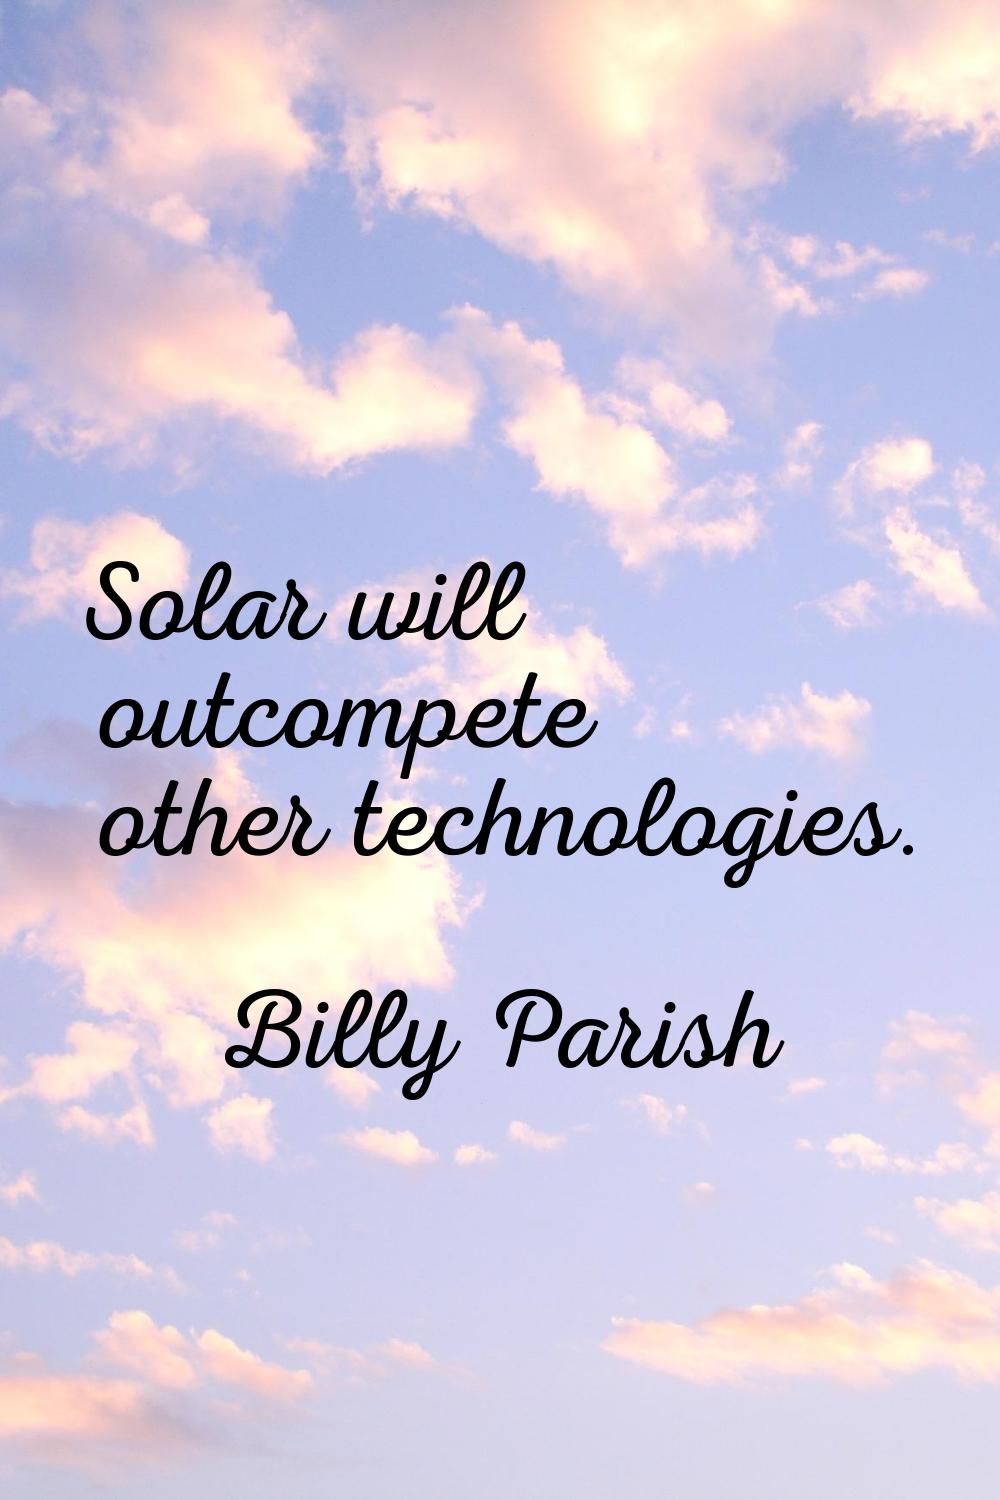 Solar will outcompete other technologies.